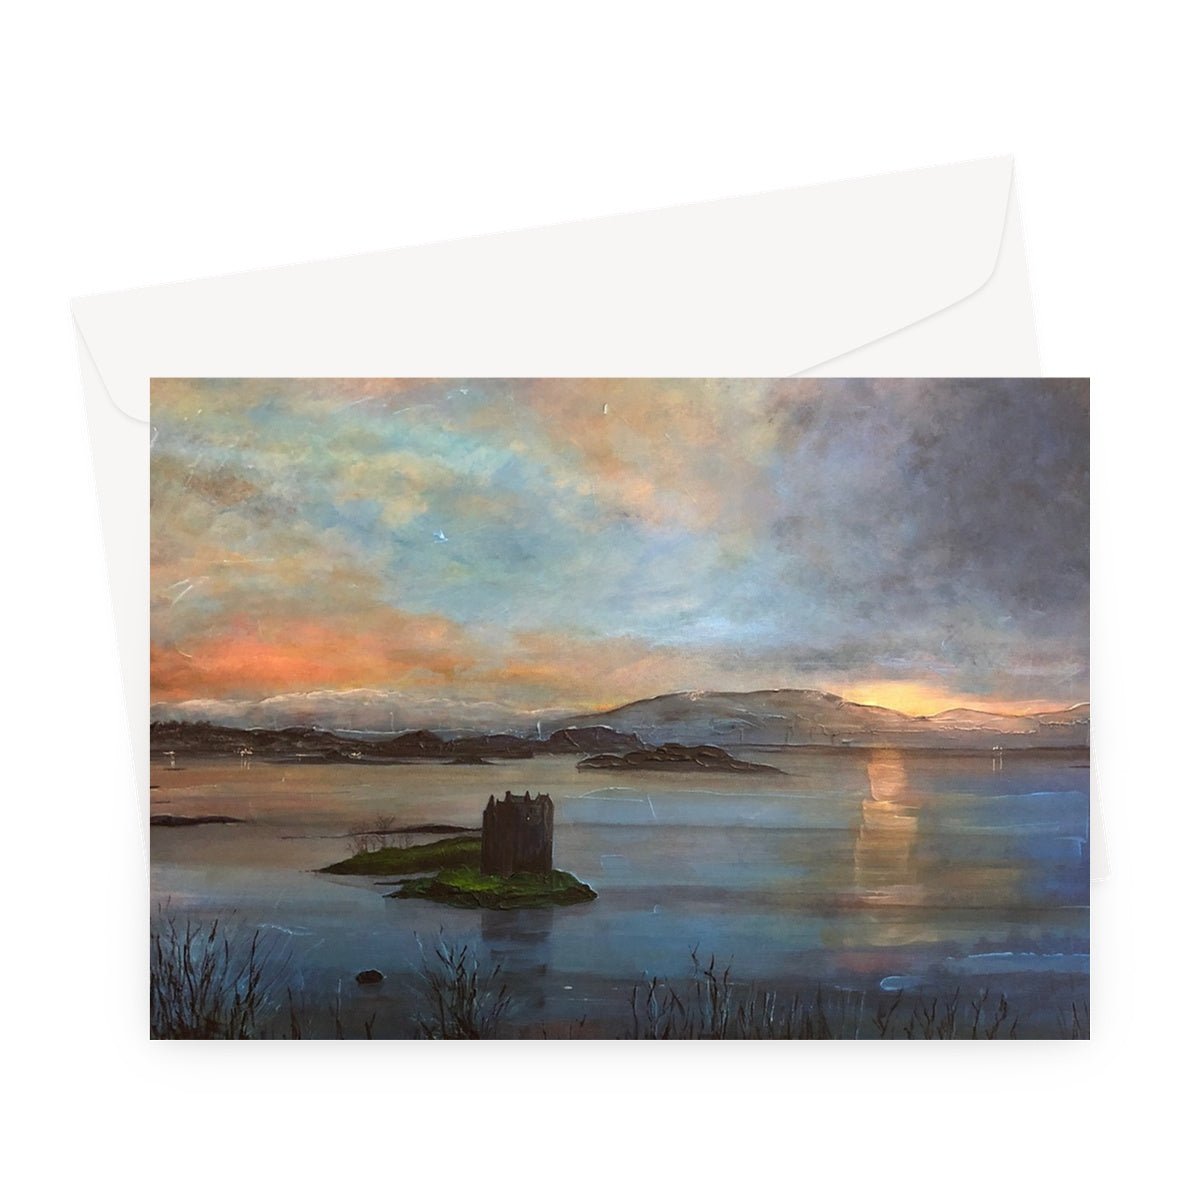 Castle Stalker Twilight Art Gifts Greeting Card-Greetings Cards-Scottish Castles Art Gallery-A5 Landscape-1 Card-Paintings, Prints, Homeware, Art Gifts From Scotland By Scottish Artist Kevin Hunter